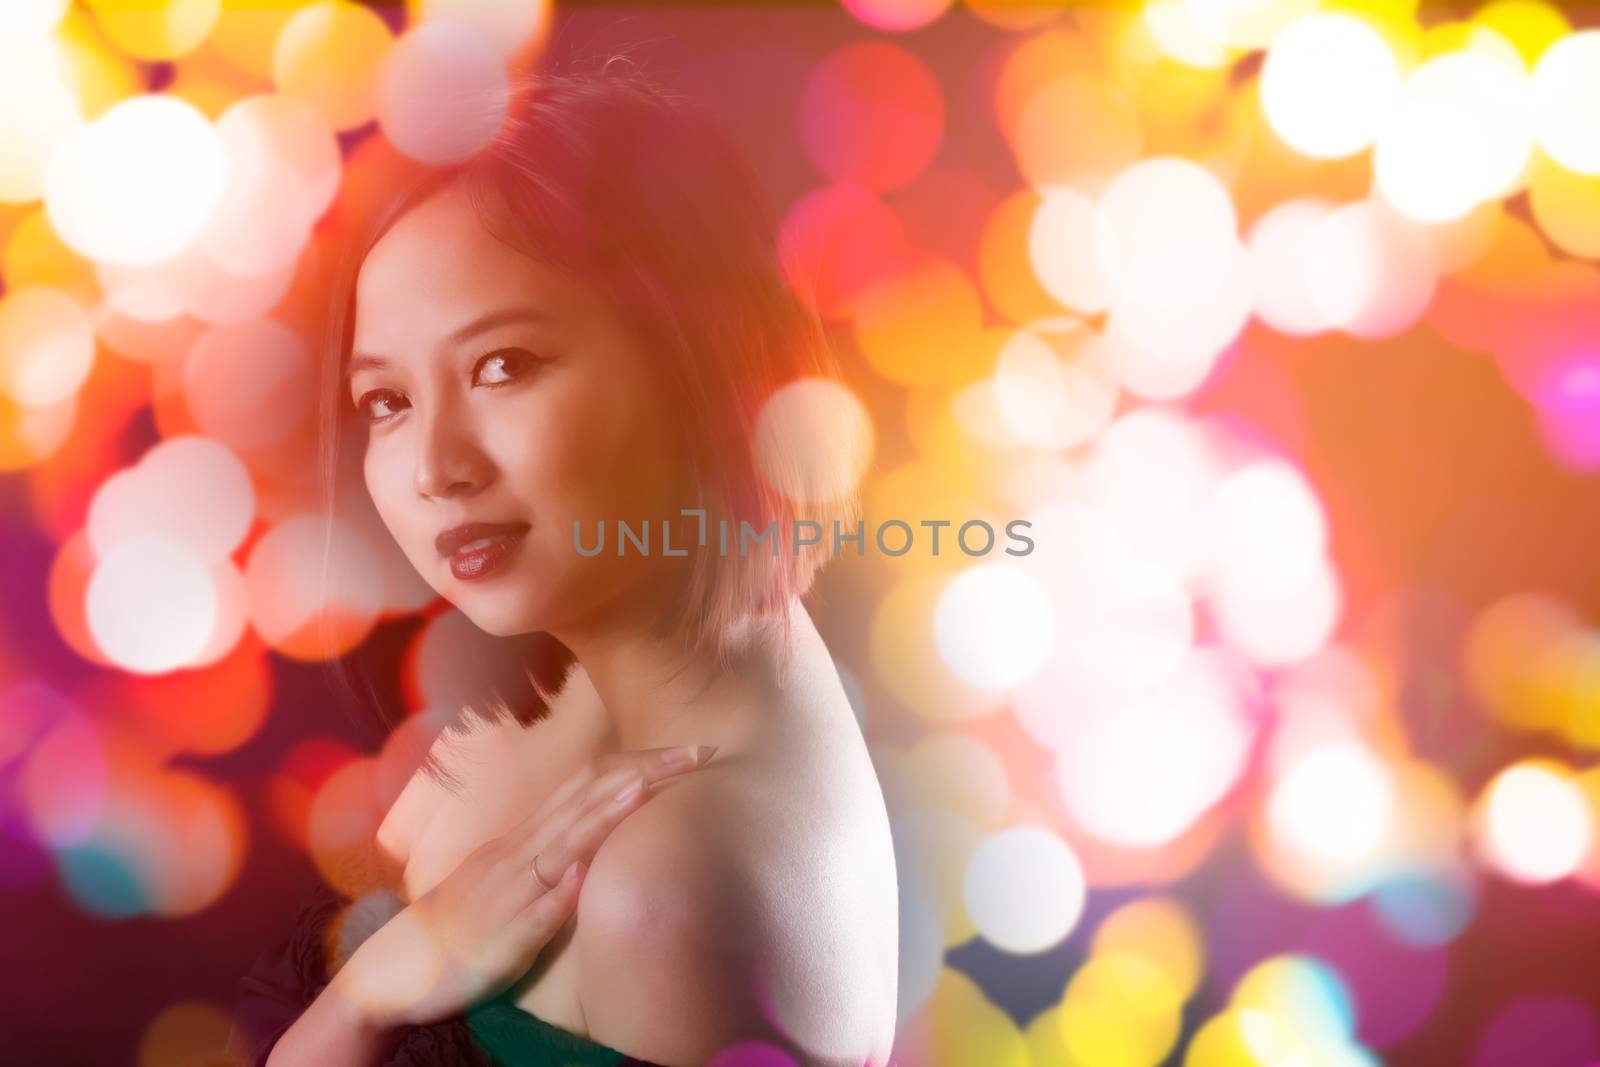 Double exposure of lady and bokeh effect - nightlife concept